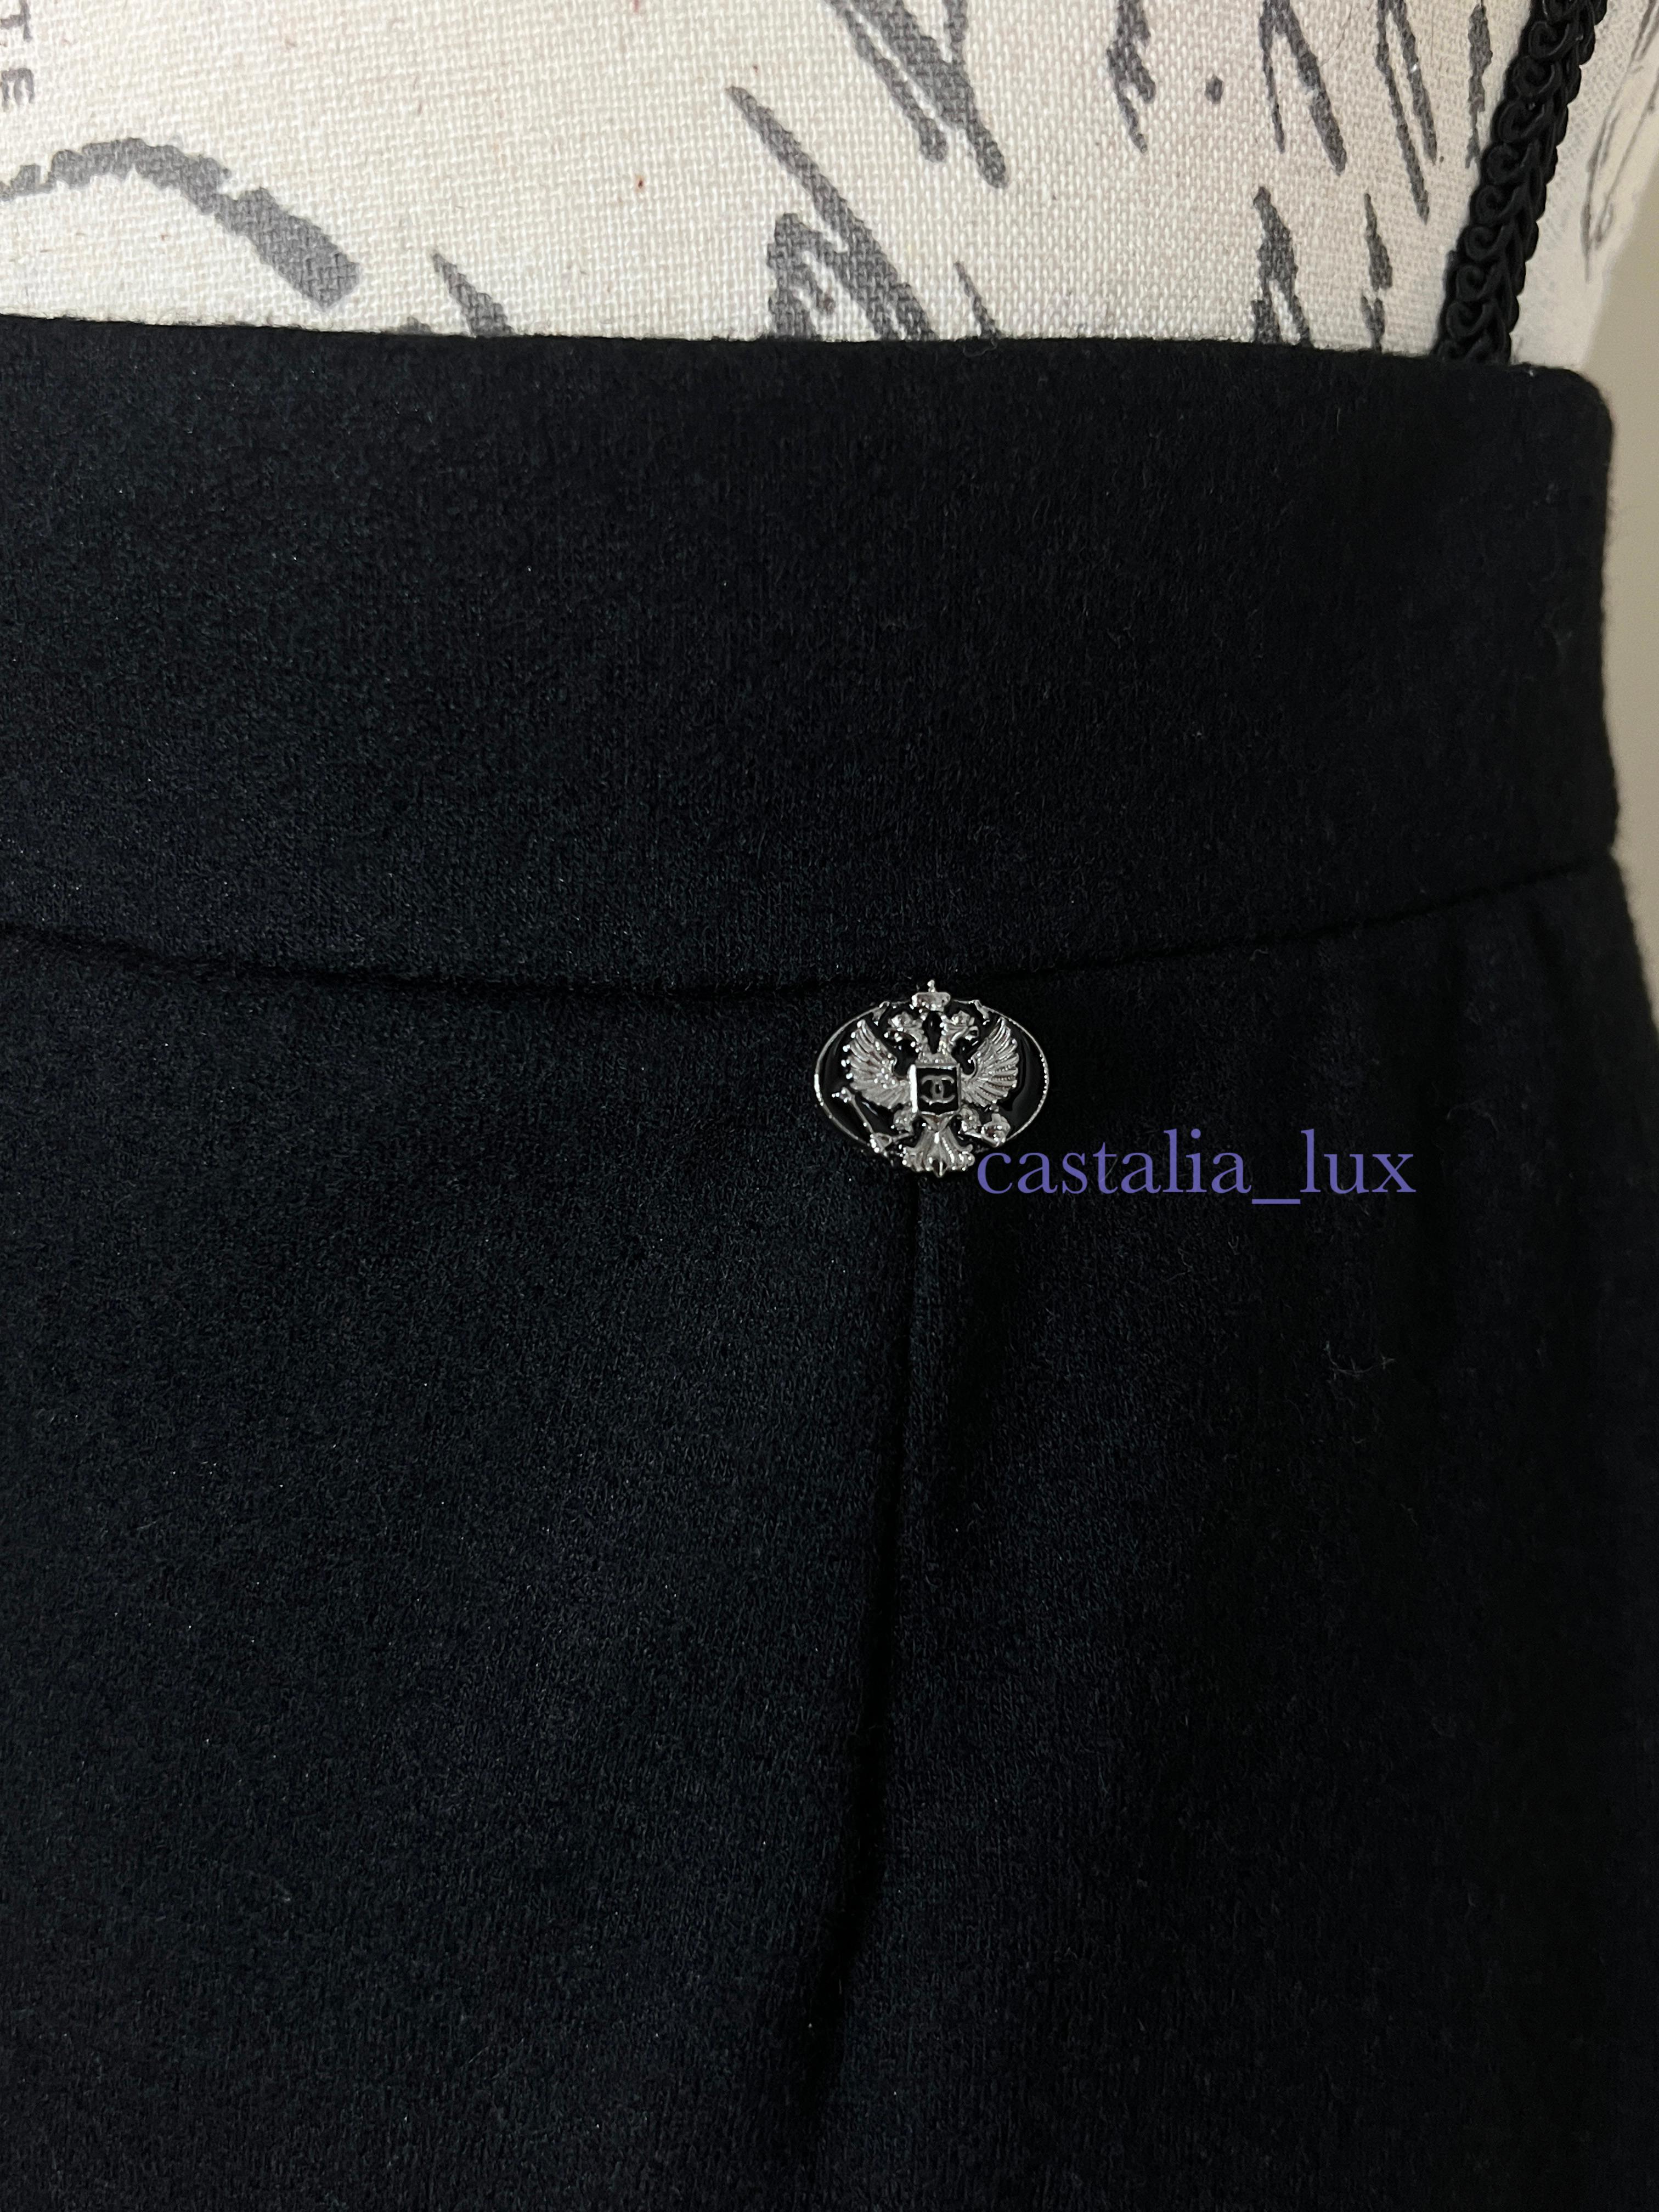 Chanel New Eagle Charm Black Pencil Skirt For Sale 6